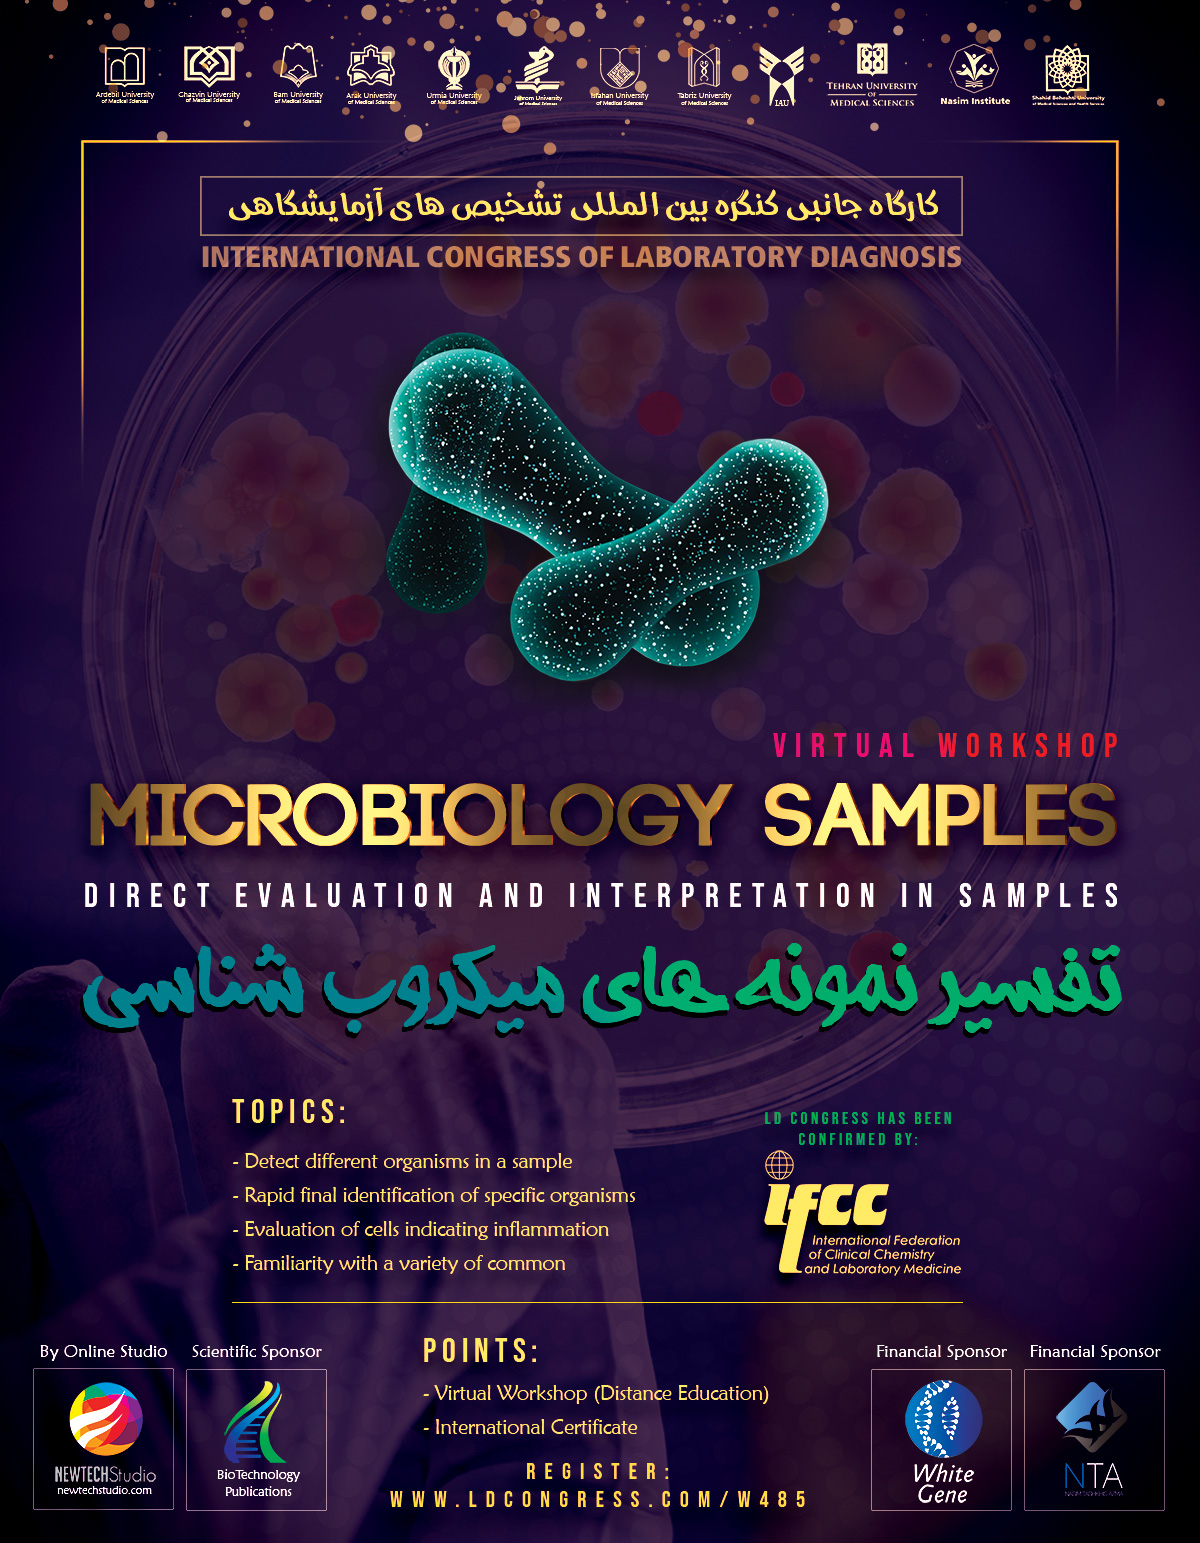 Evaluation of Reporting and Direct Interpretation in Microbiological Samples